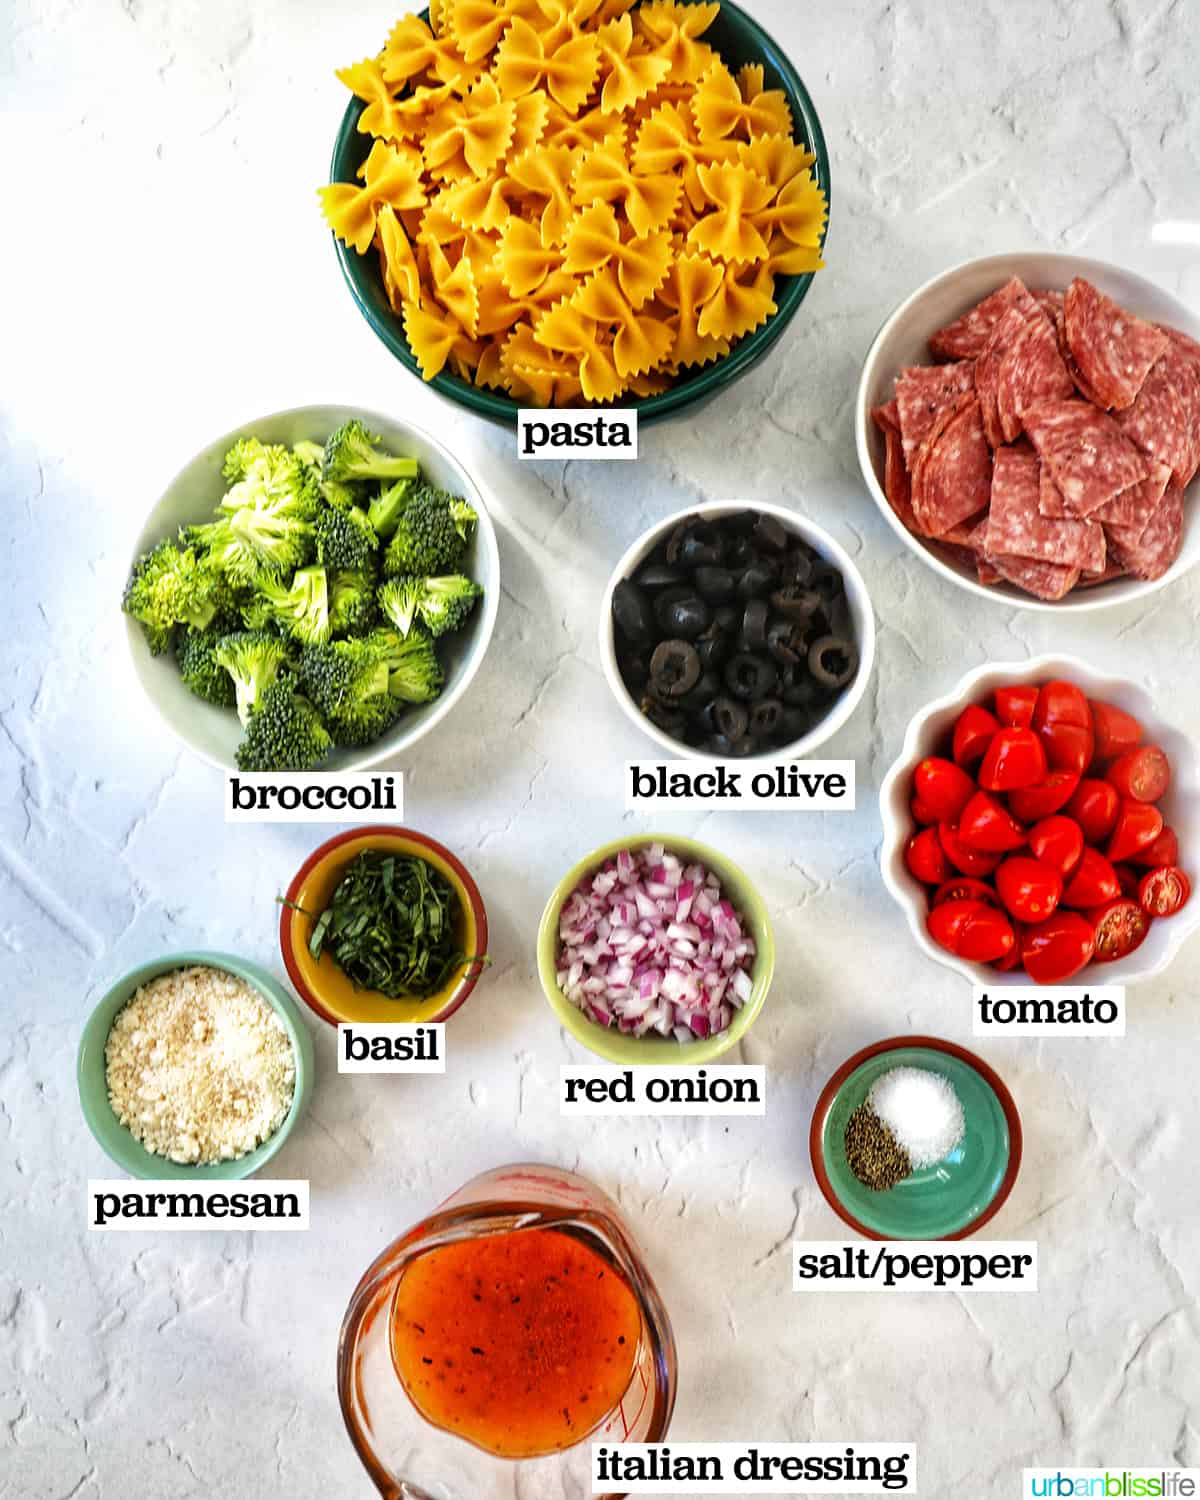 Bowls of ingredients to make italian bowtie pasta salad: tomatoes, red onions, broccoli, pasta, salami, and black olives.